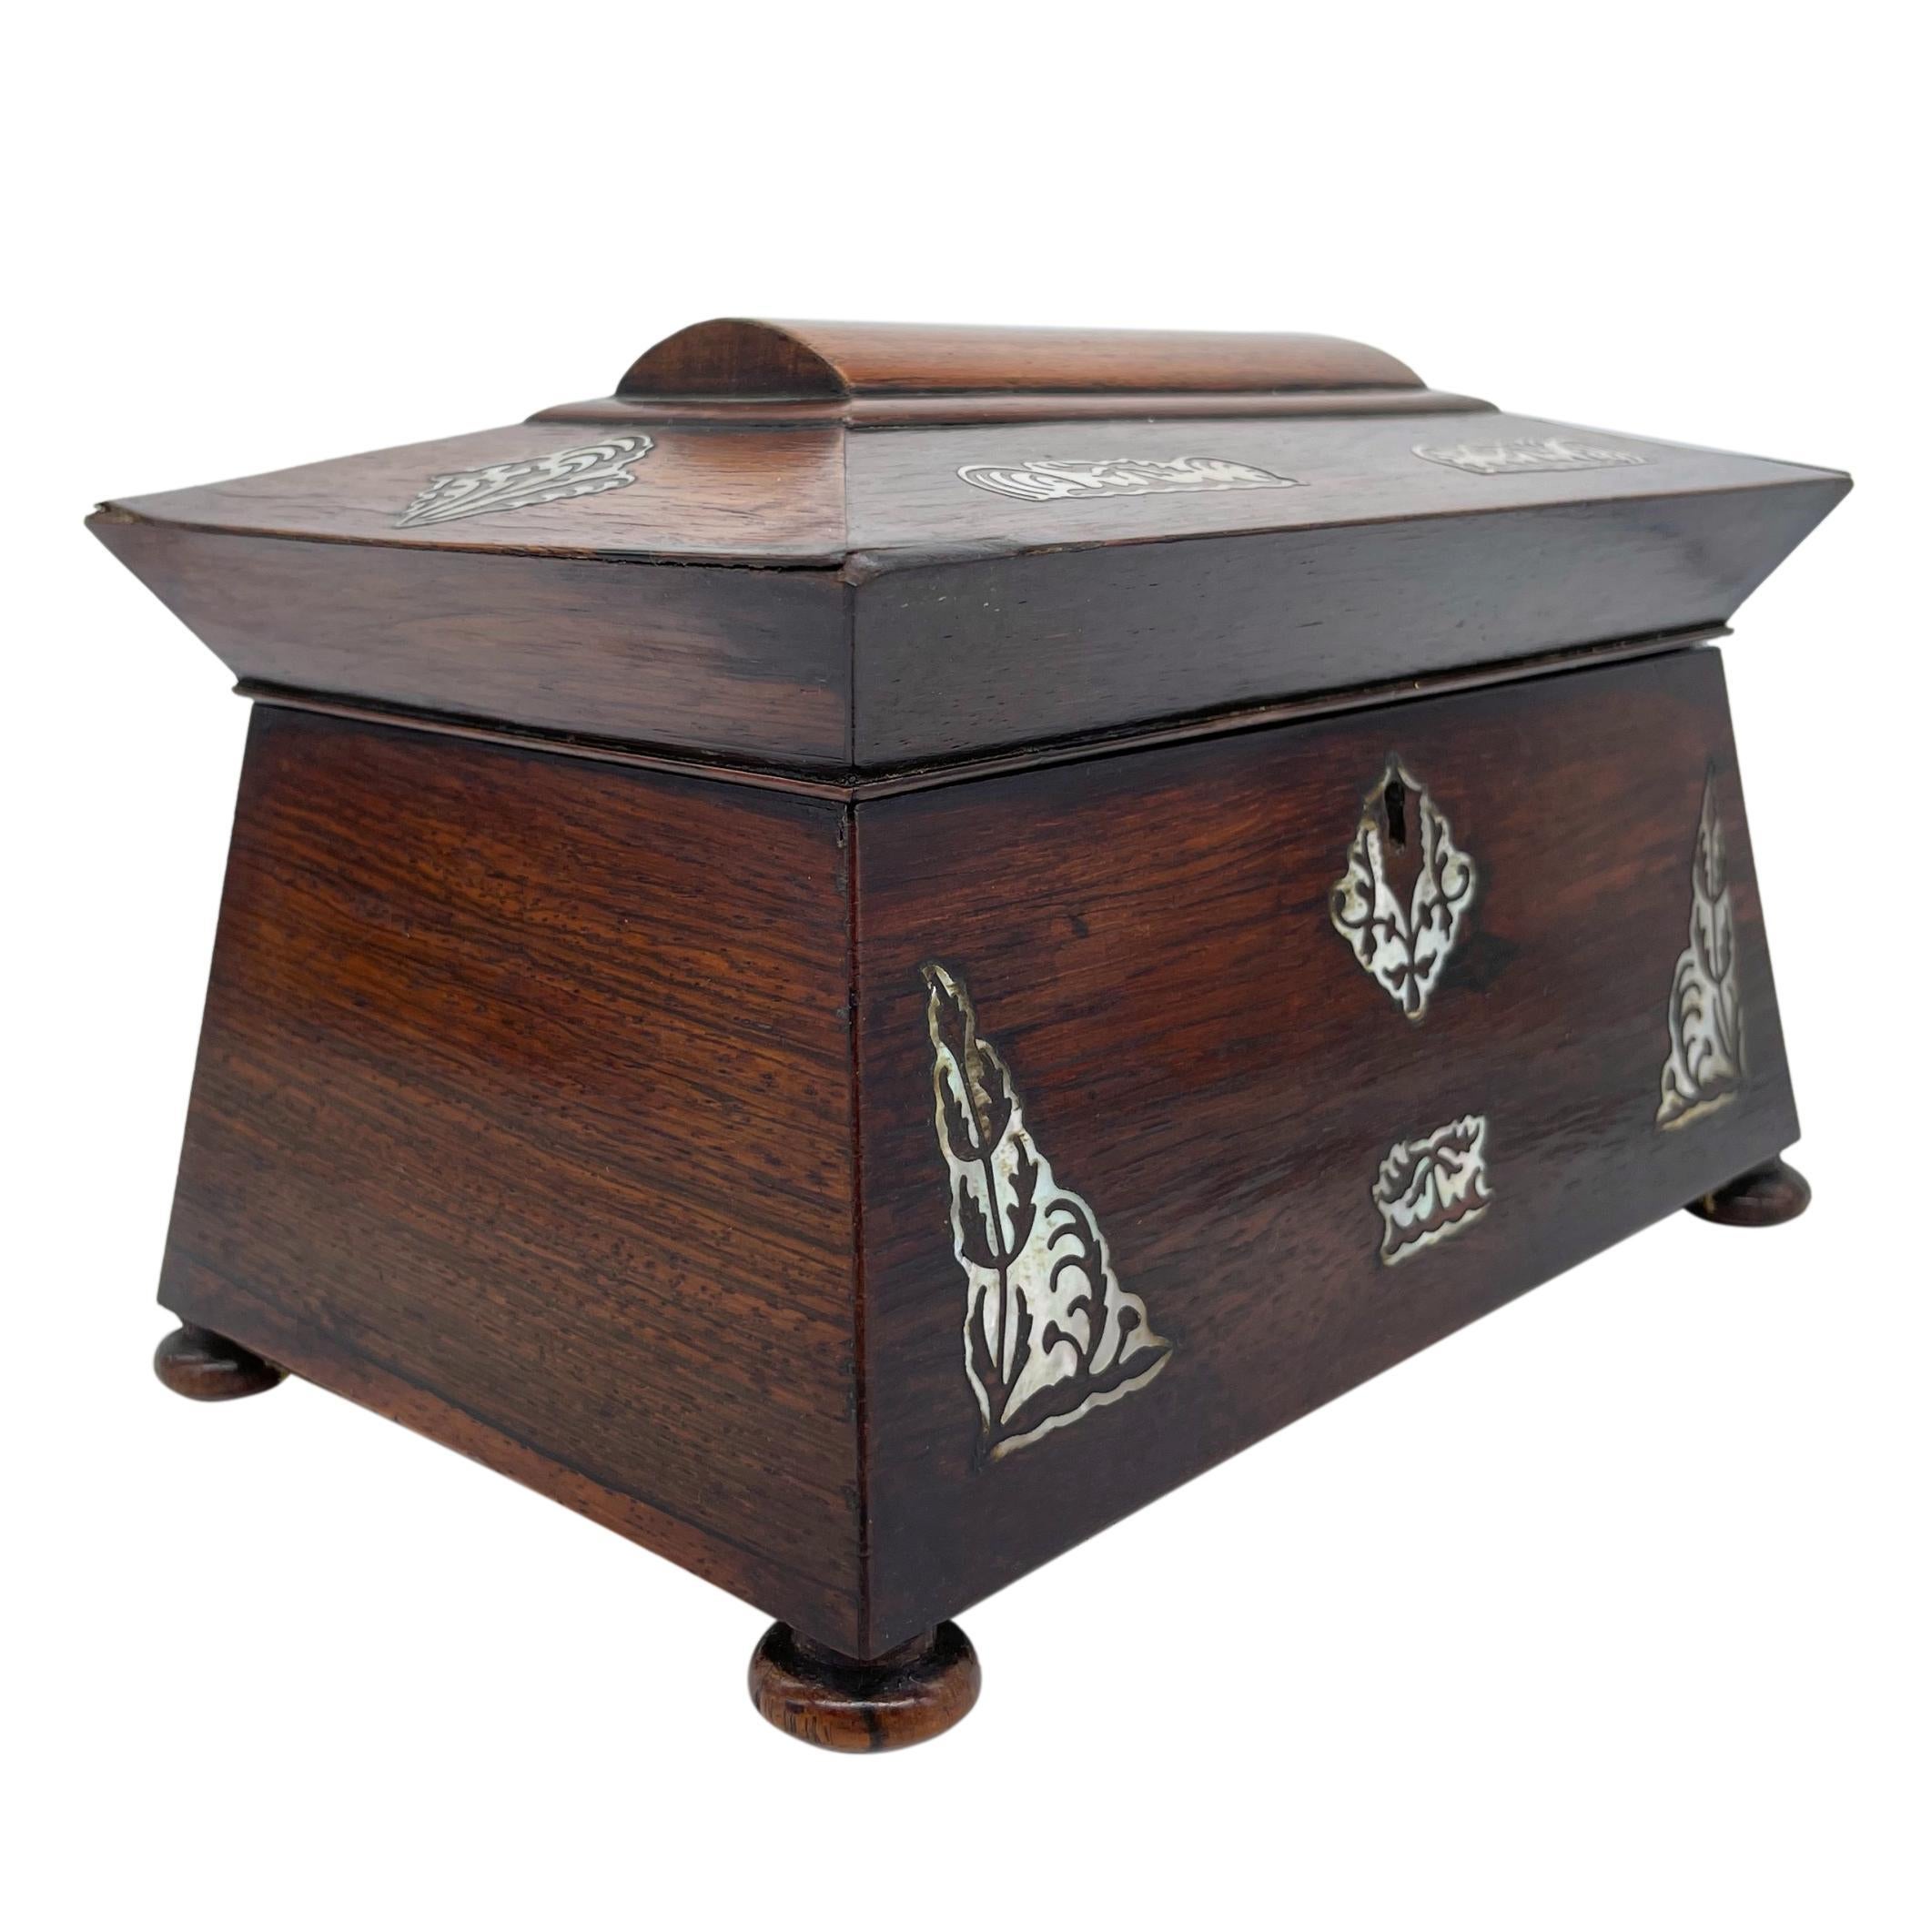 William IV Rosewood and Mother-of-Pearl Inlaid Tea Caddy, English, ca. 1835 For Sale 2